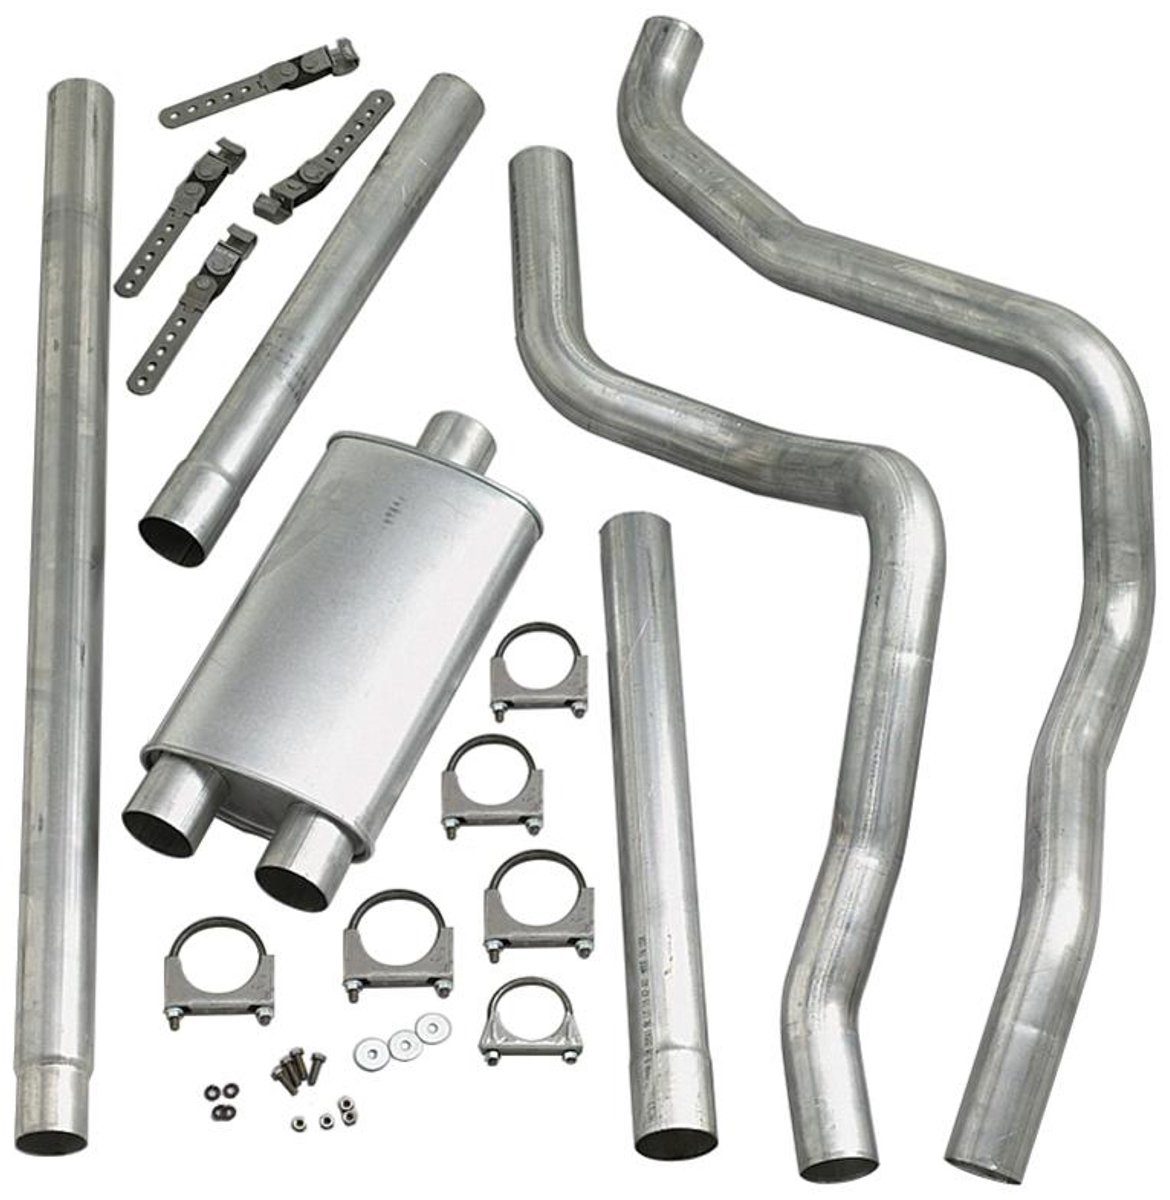 OBS trucks, OBS Guide, OBS parts, OBS truck parts, c1500, chevy c1500 parts, 1988-98 chevy truck parts, 1988-98 GM truck parts, summit racing OBS exhaust